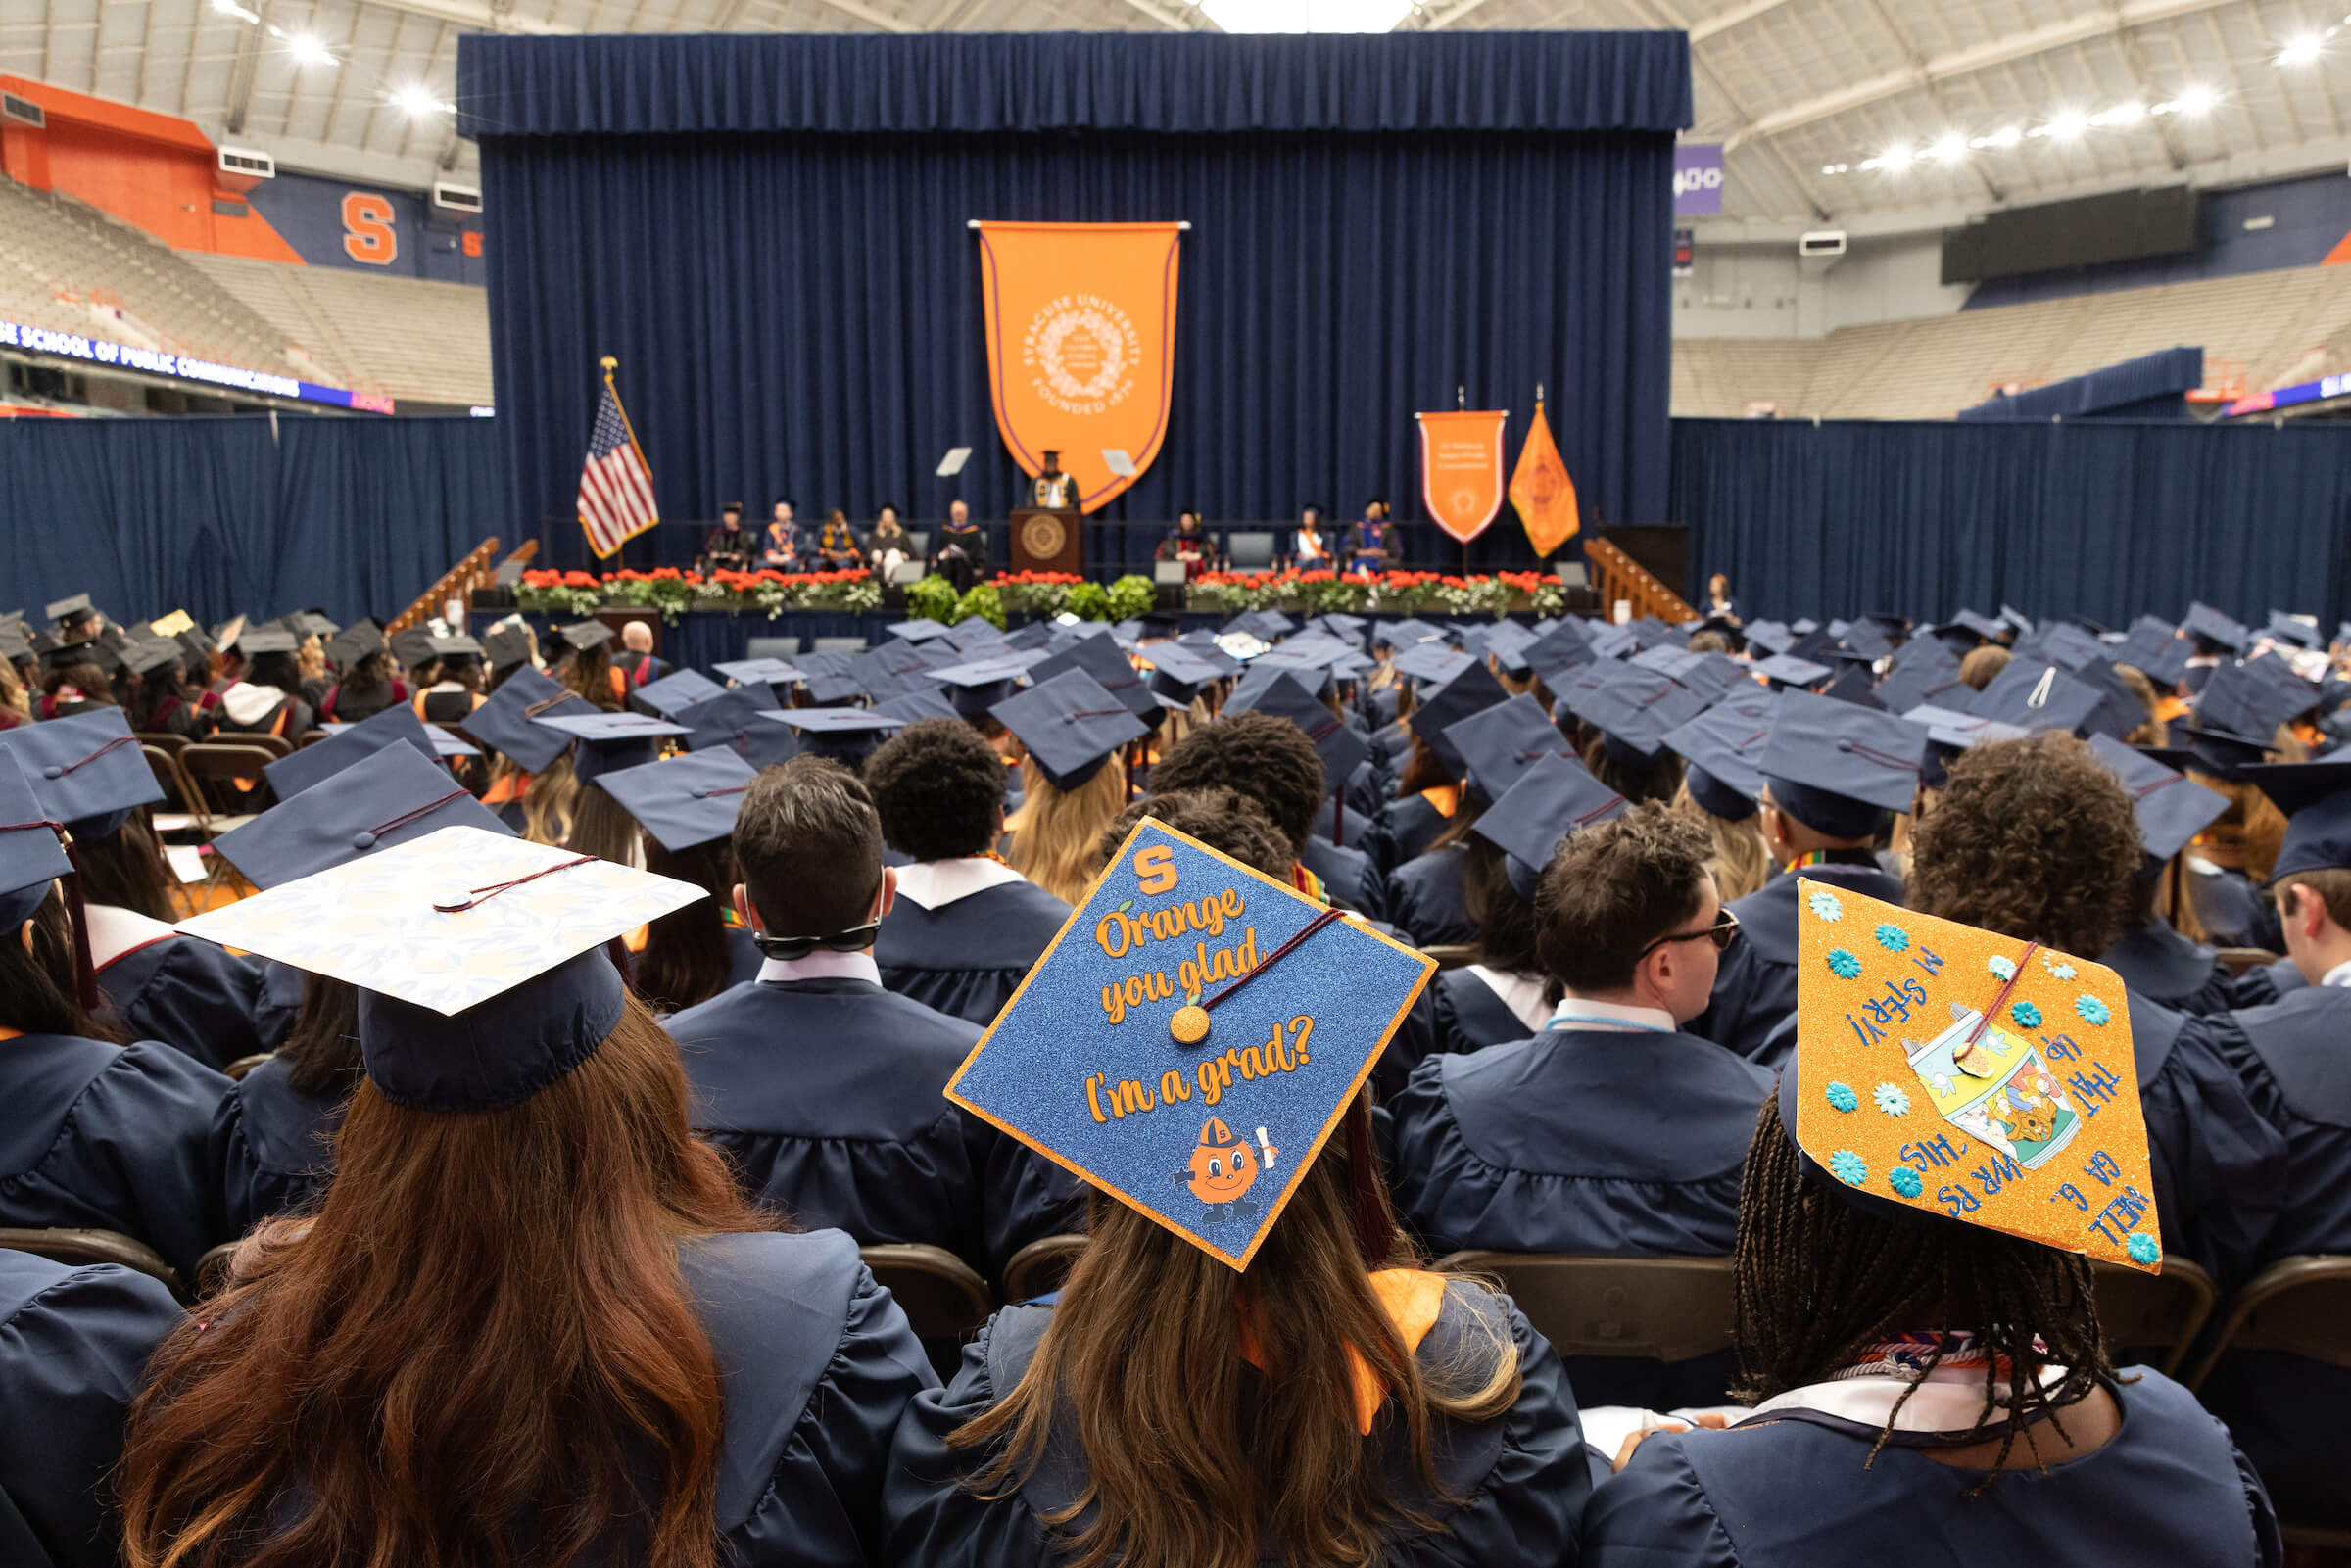 Students in graduation caps and gowns at Commencement. Writing on one of the caps is visible and says "Orange you glad I'm a grad?"